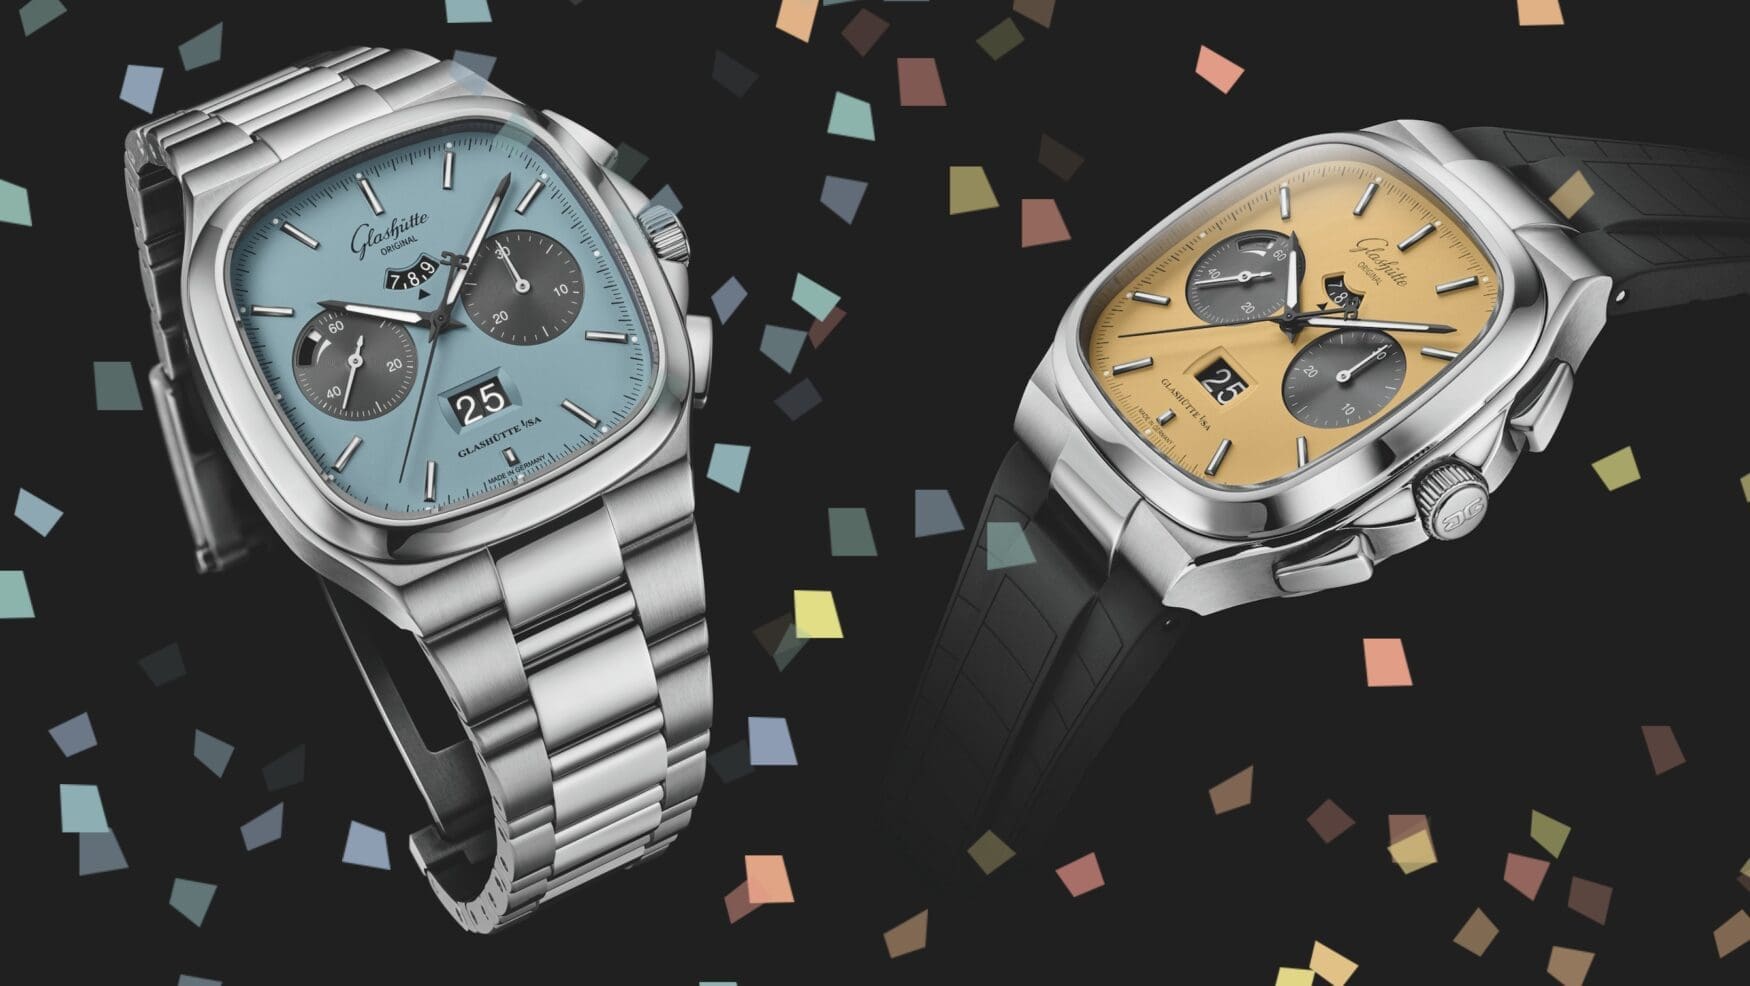 The Glashütte Original Seventies Chronograph Panorama Date “Golden Bay” and “Ocean Breeze” limited editions are a retro holiday from the ordinary